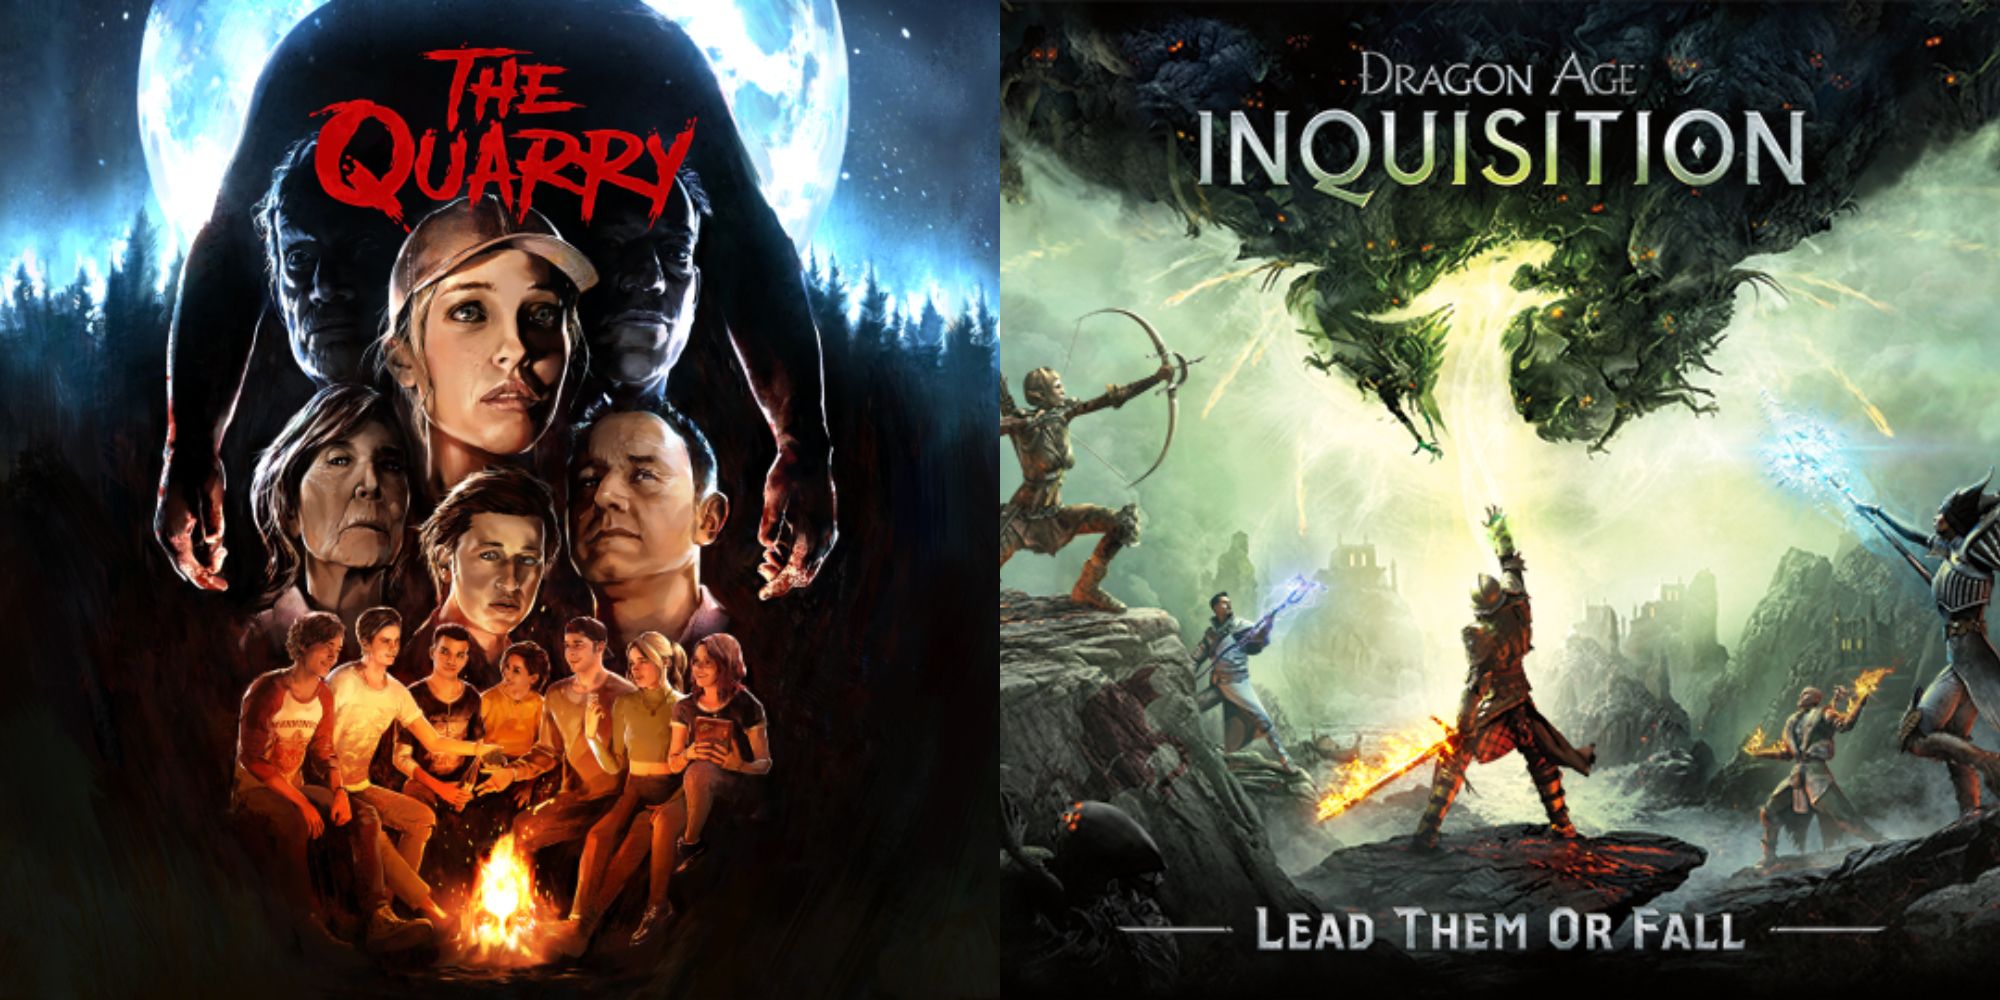 Split image showing posters for The Quarry and Dragon Age Inquisition.